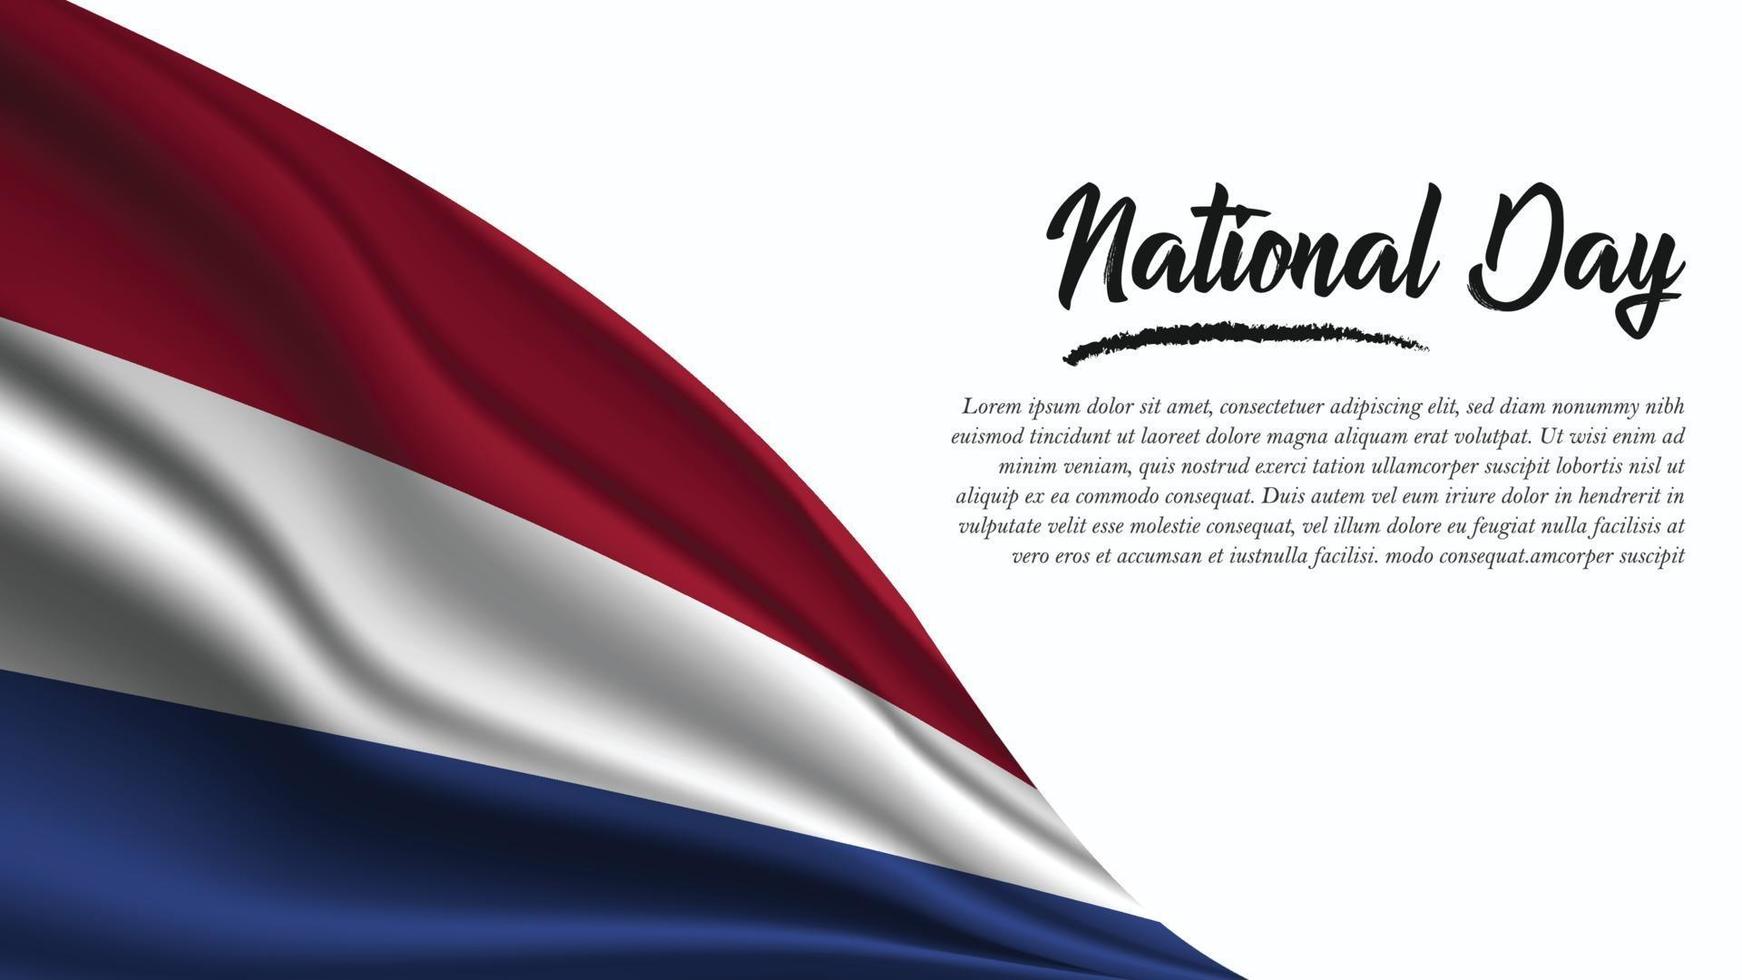 National Day Banner with Netherlands Flag background vector